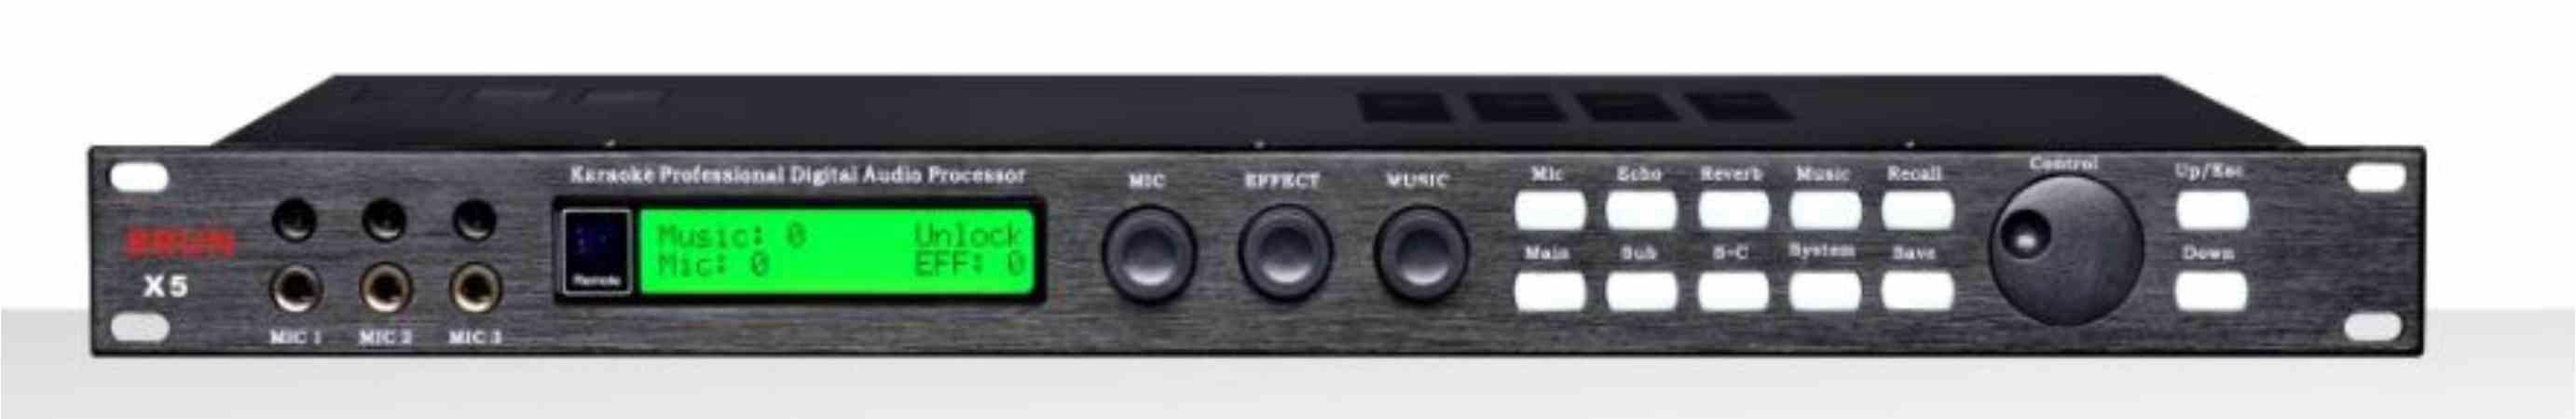 5.1 Channels Mic/Microphone Preamp